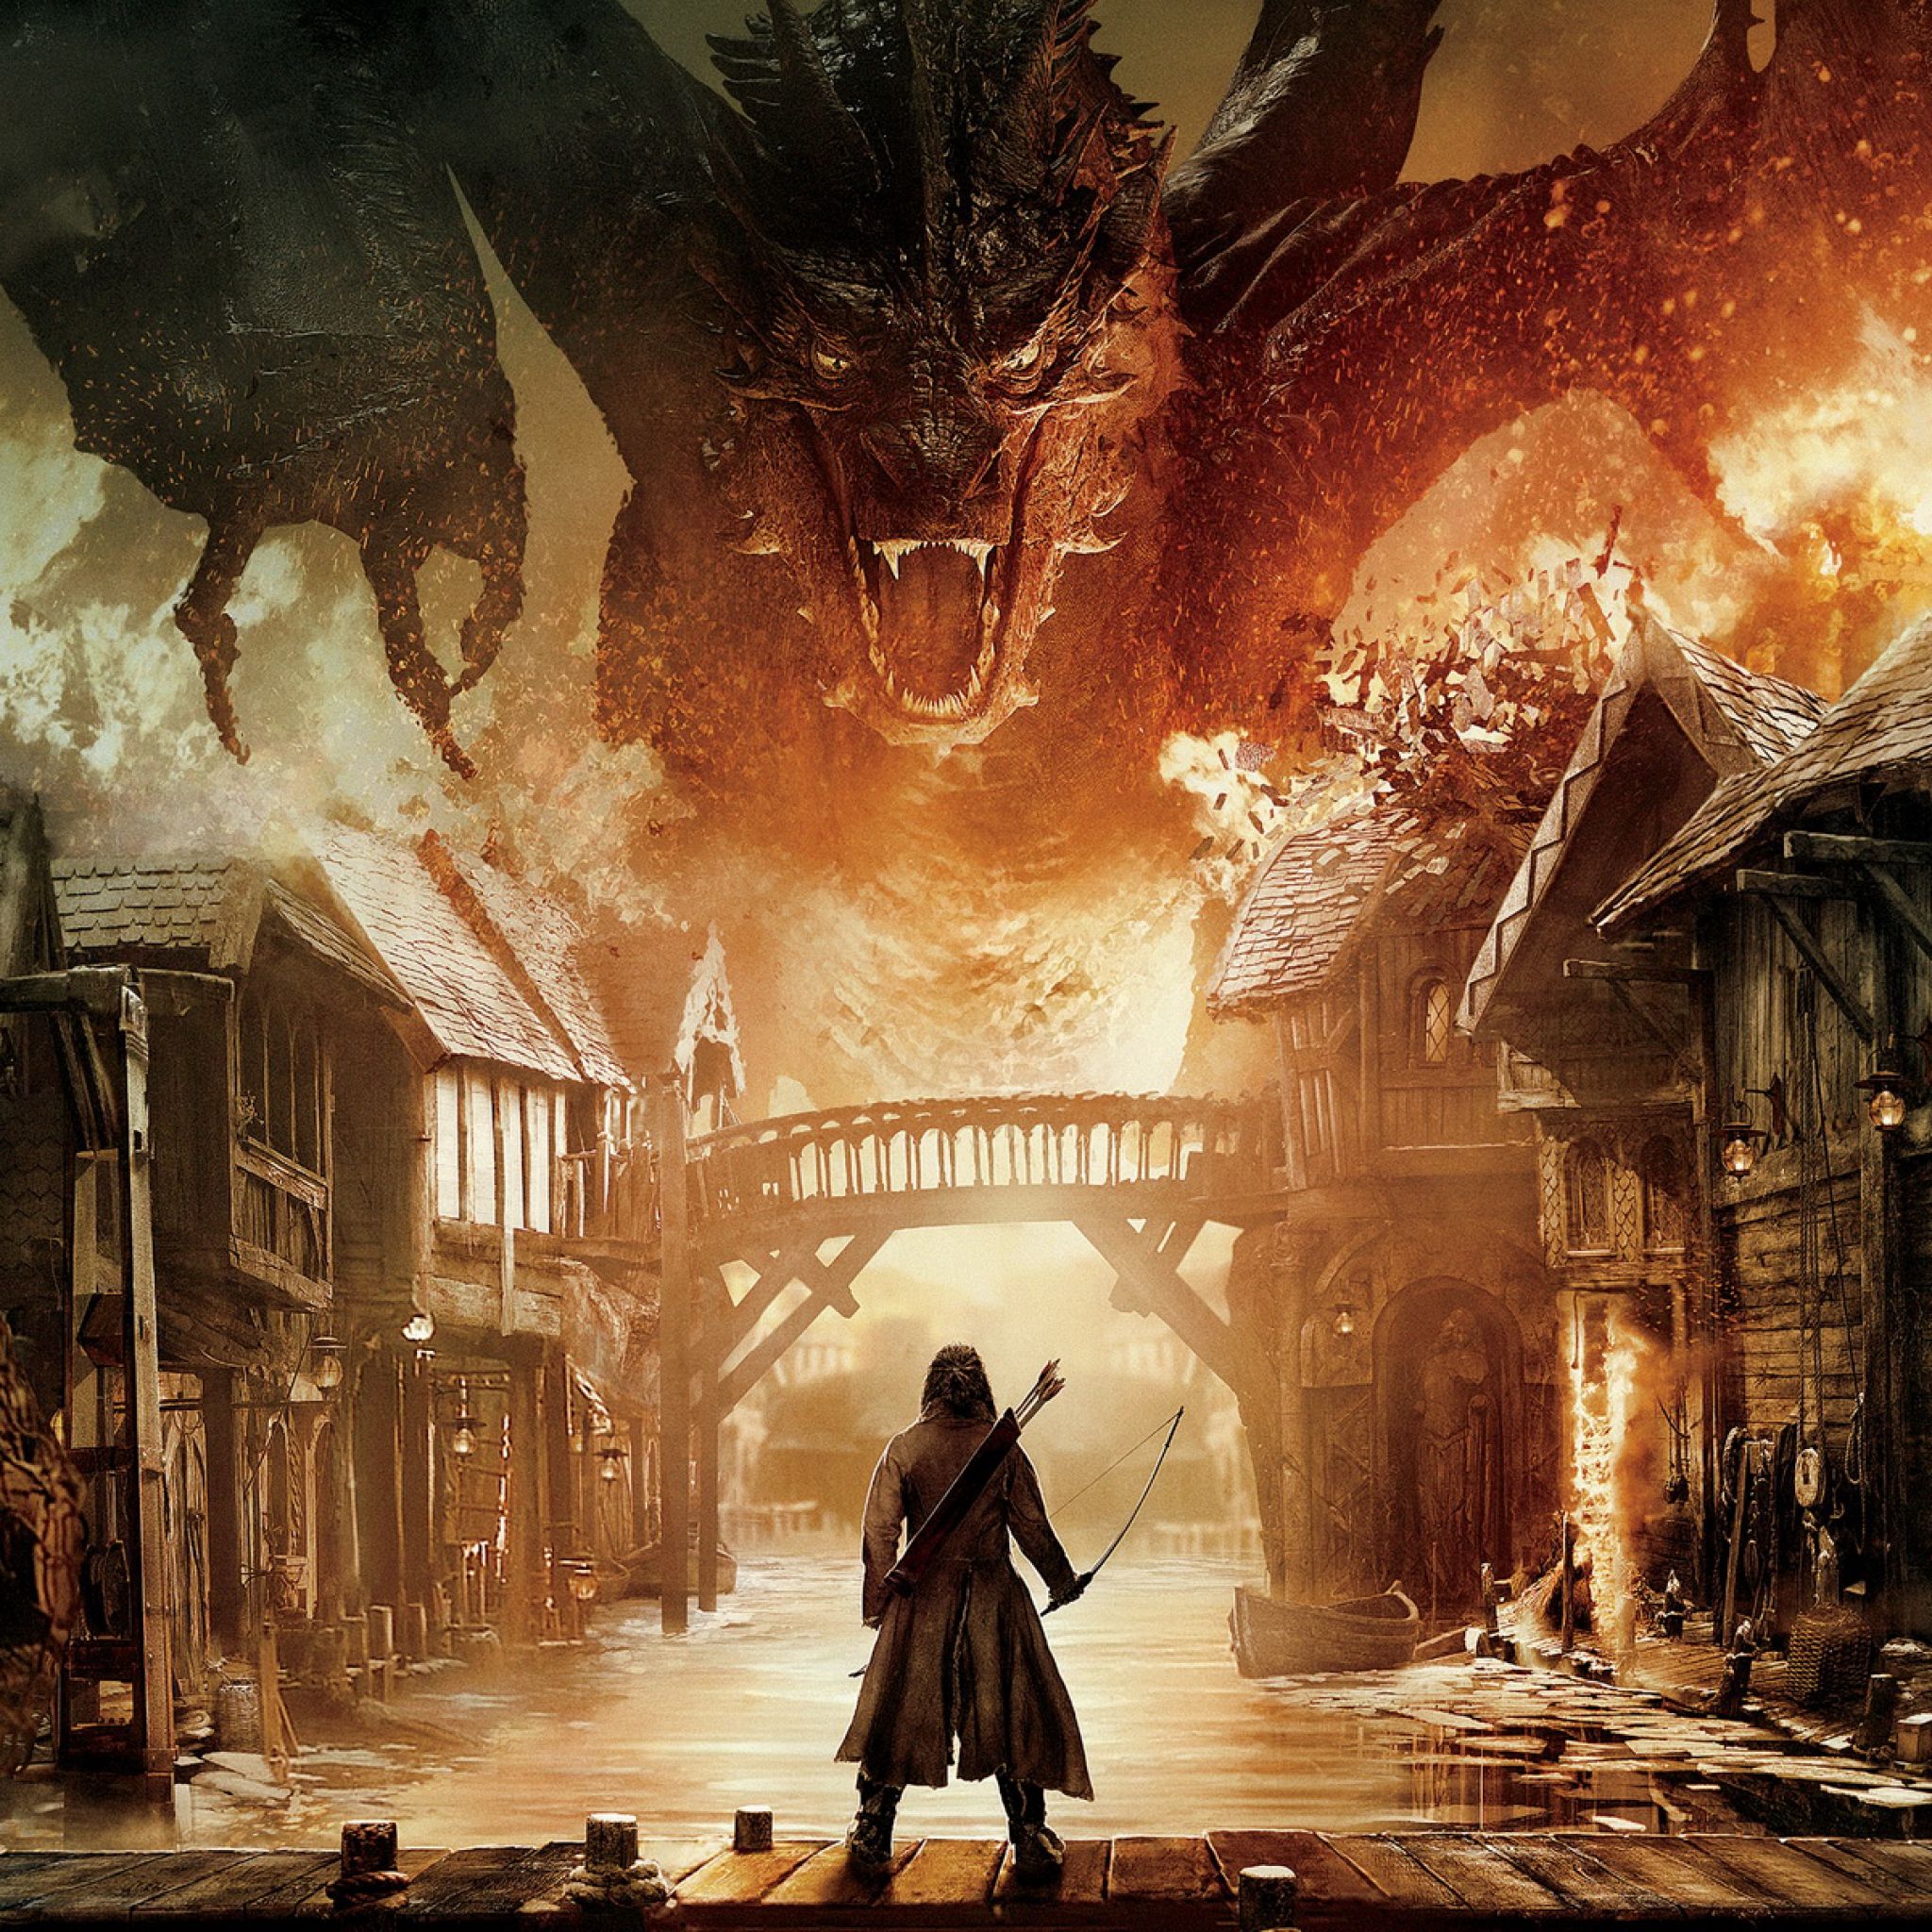 Download Wallpaper 2048x2048 The hobbit the desolation of smaug ...